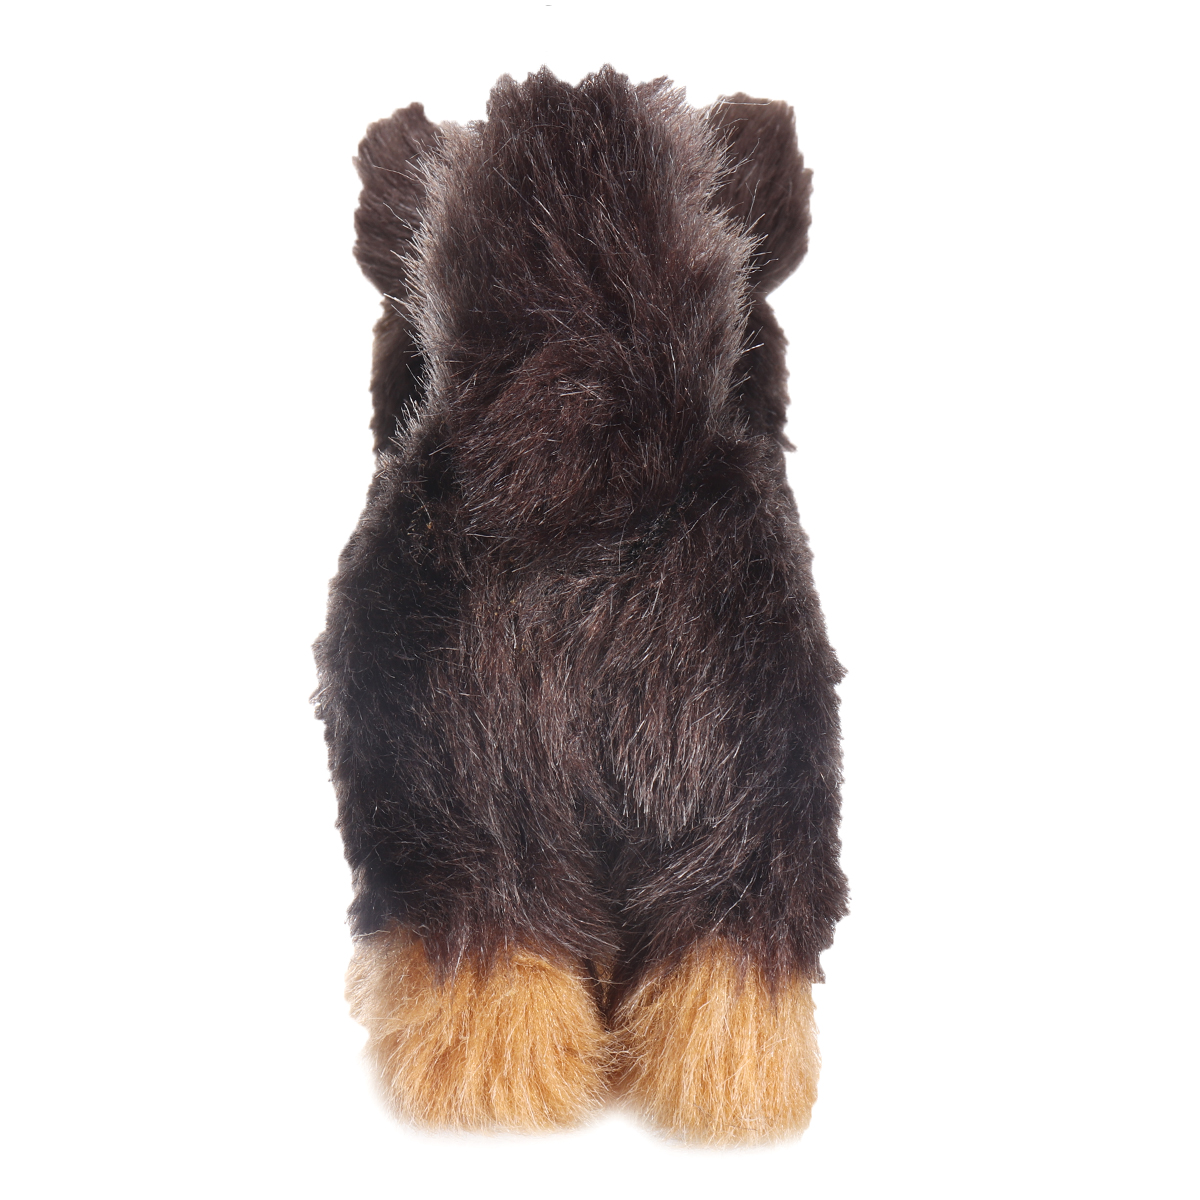 Yorkshires-Terrier-Realistic-Simulation-Plush-Dog-Lifelike-Animal-Dolls-Toy-for-Home-Decoration-Coll-1788619-7